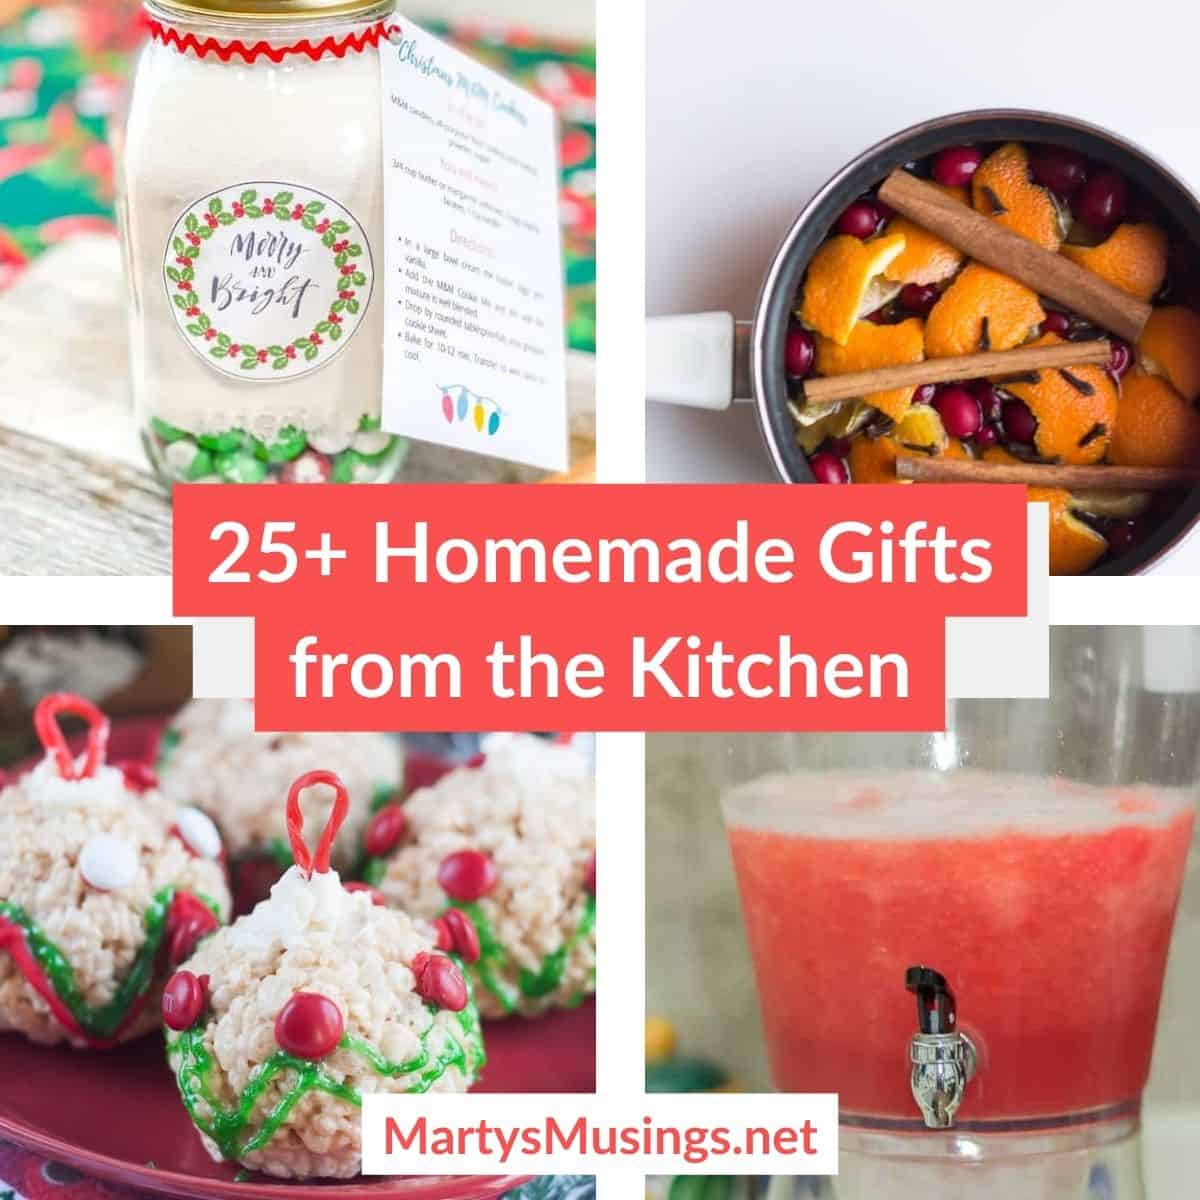 Homemade Gifts from the Kitchen